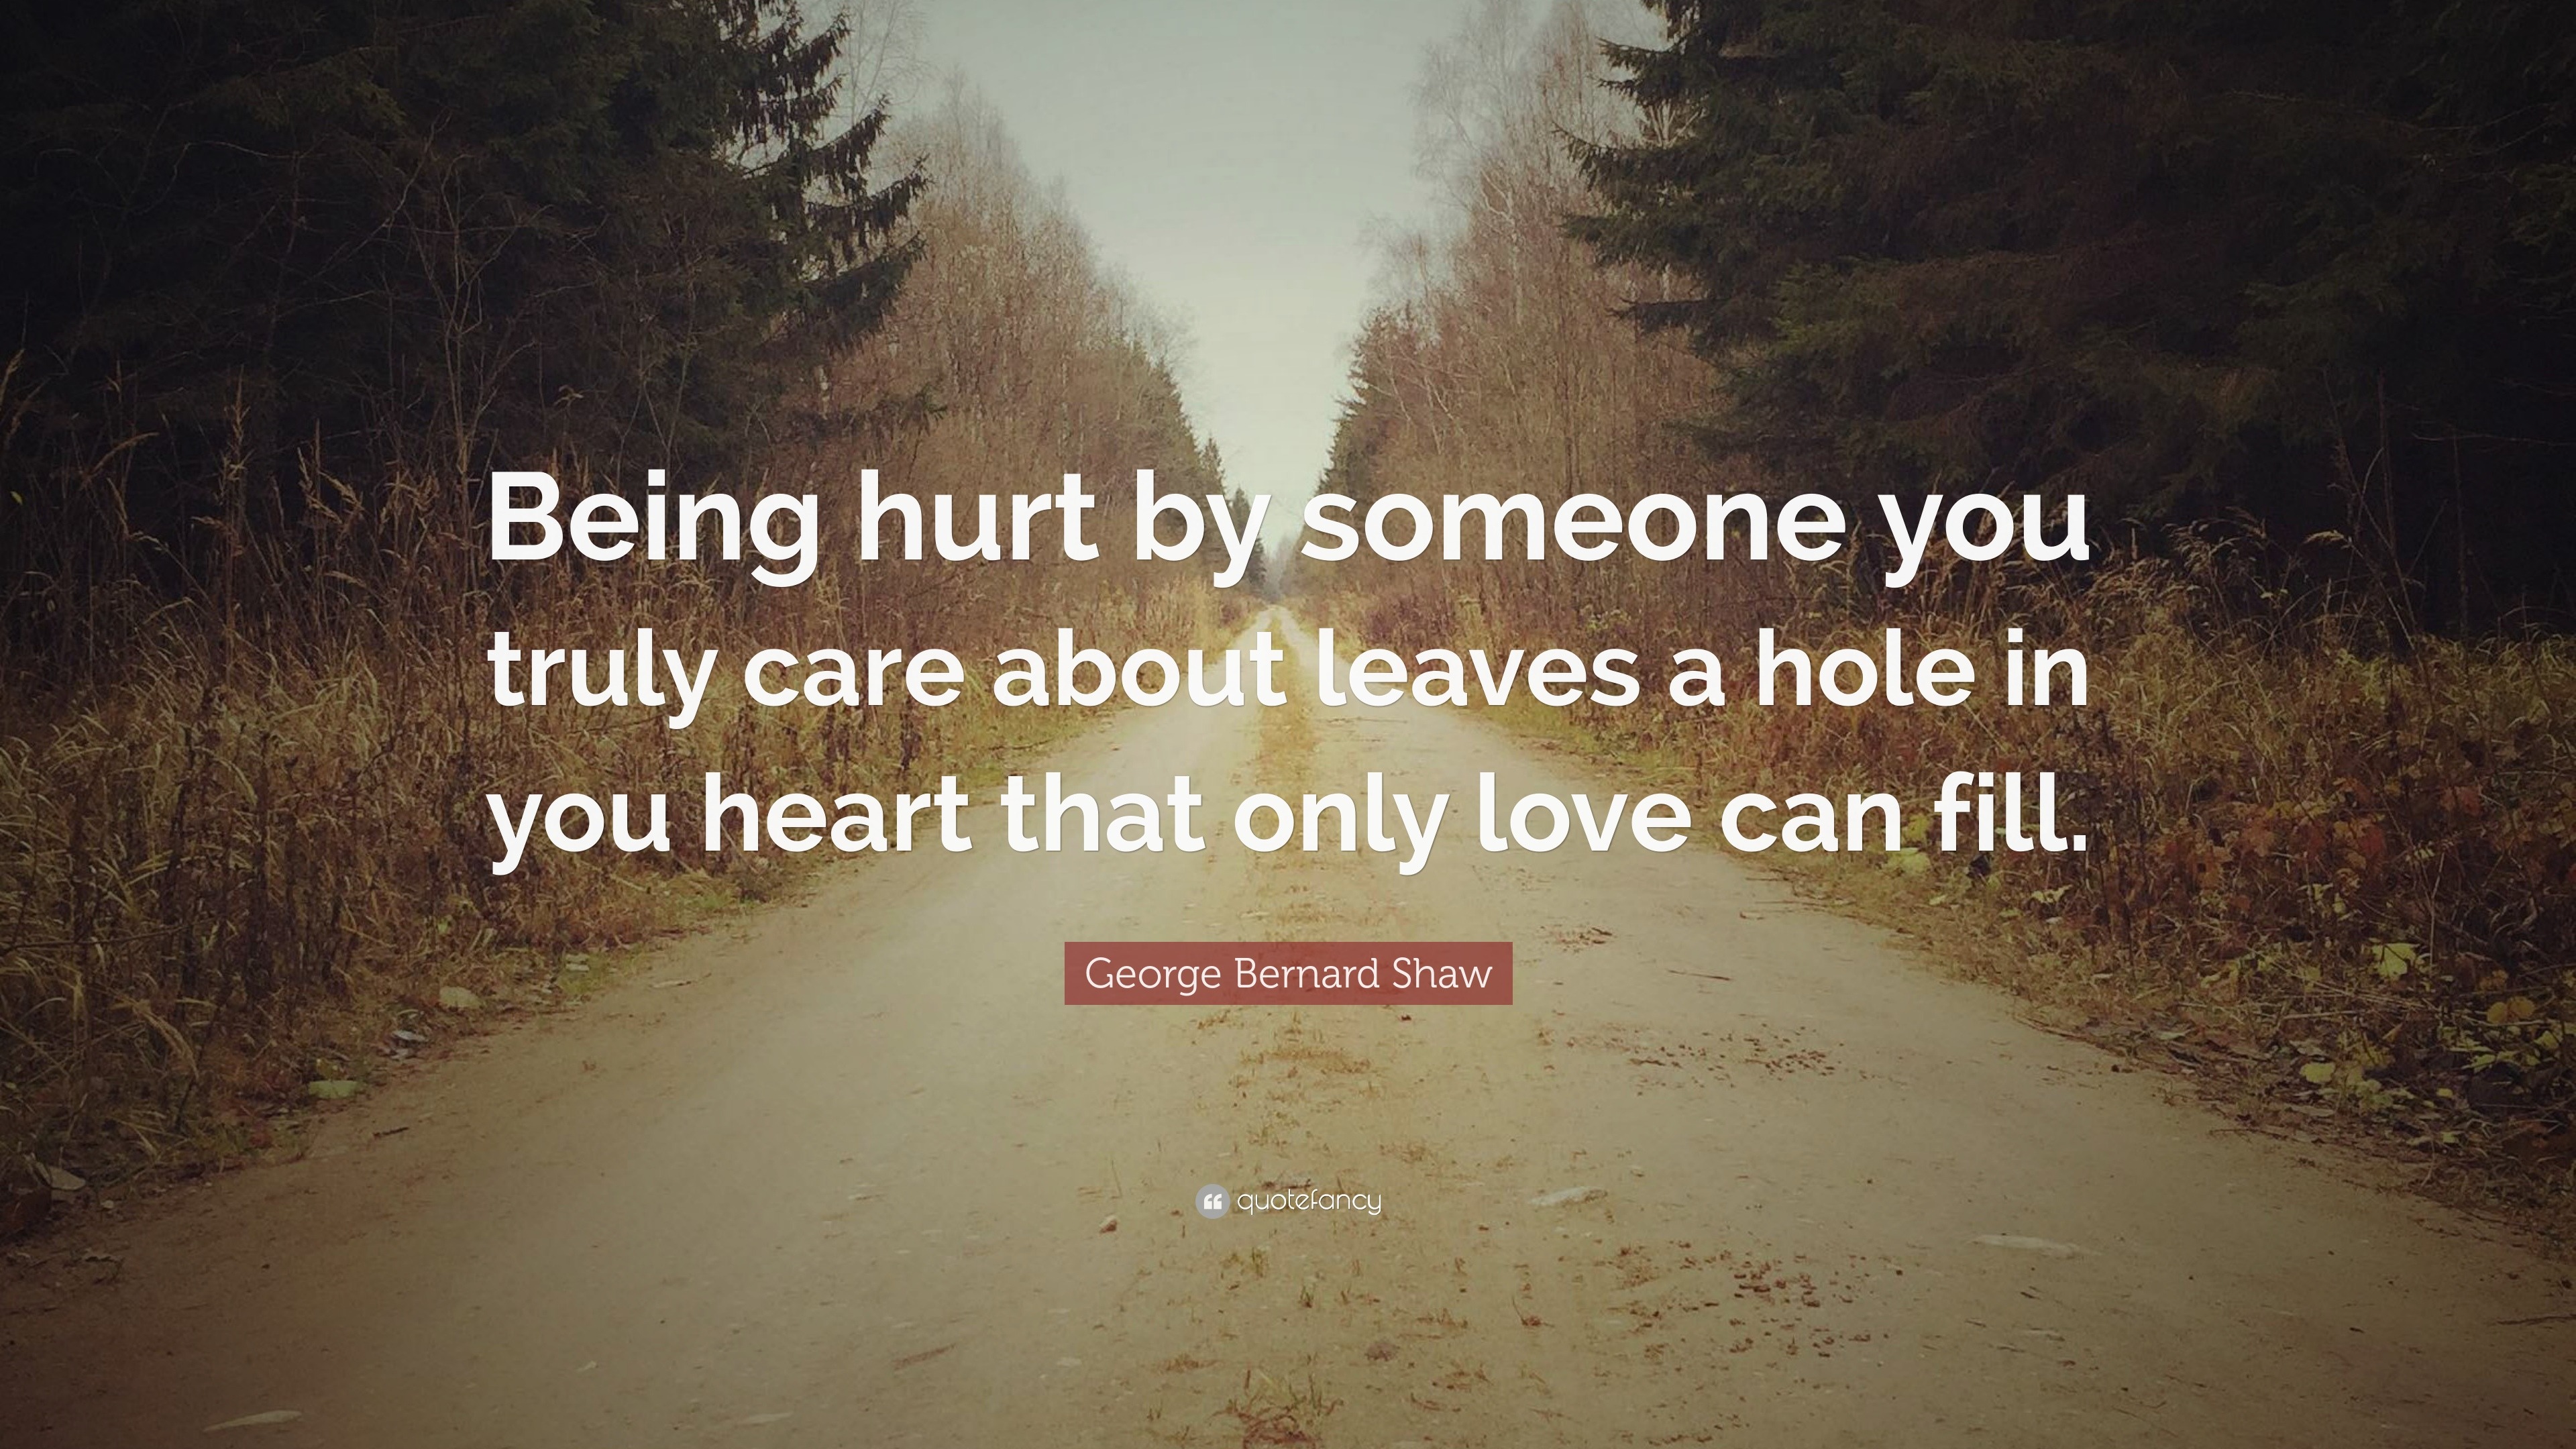 George Bernard Shaw Quote: “Being hurt by someone you truly care about ...